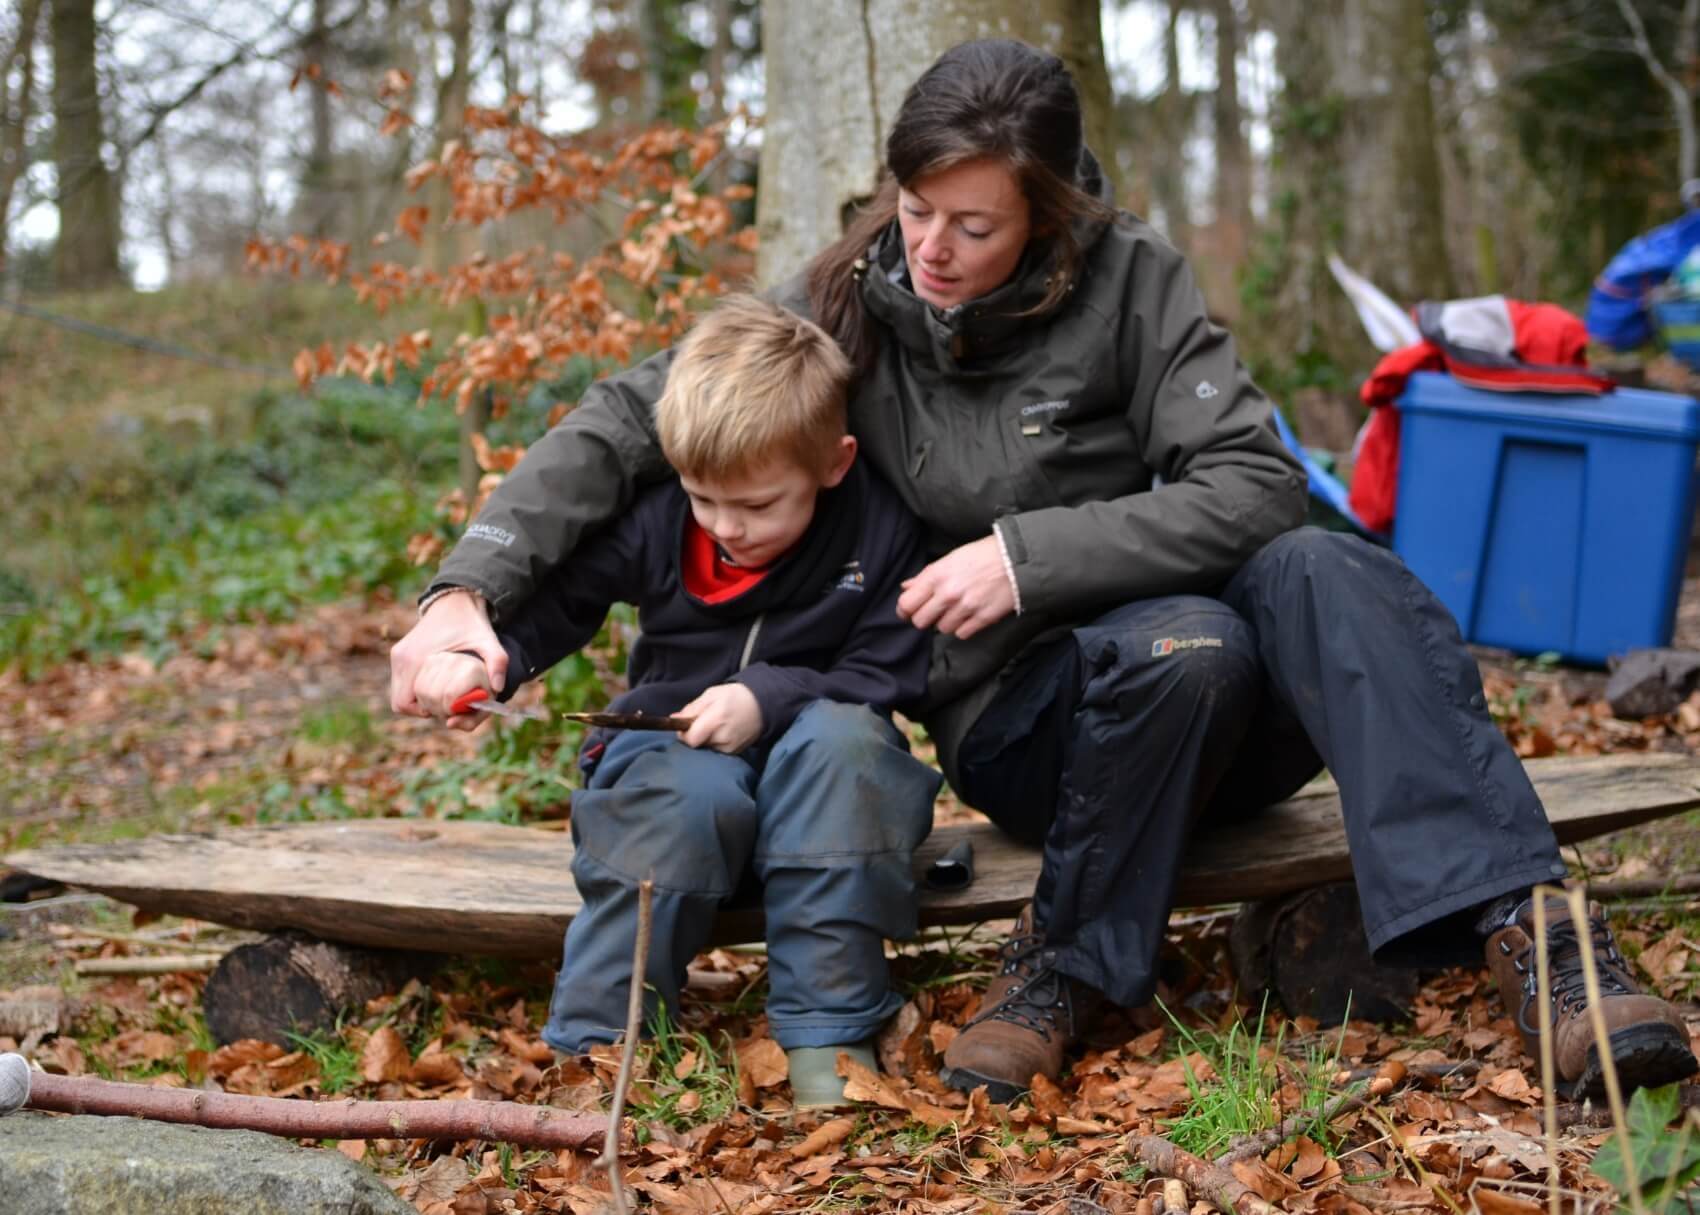 A child learning how to use a knife safely at Nature Nurture